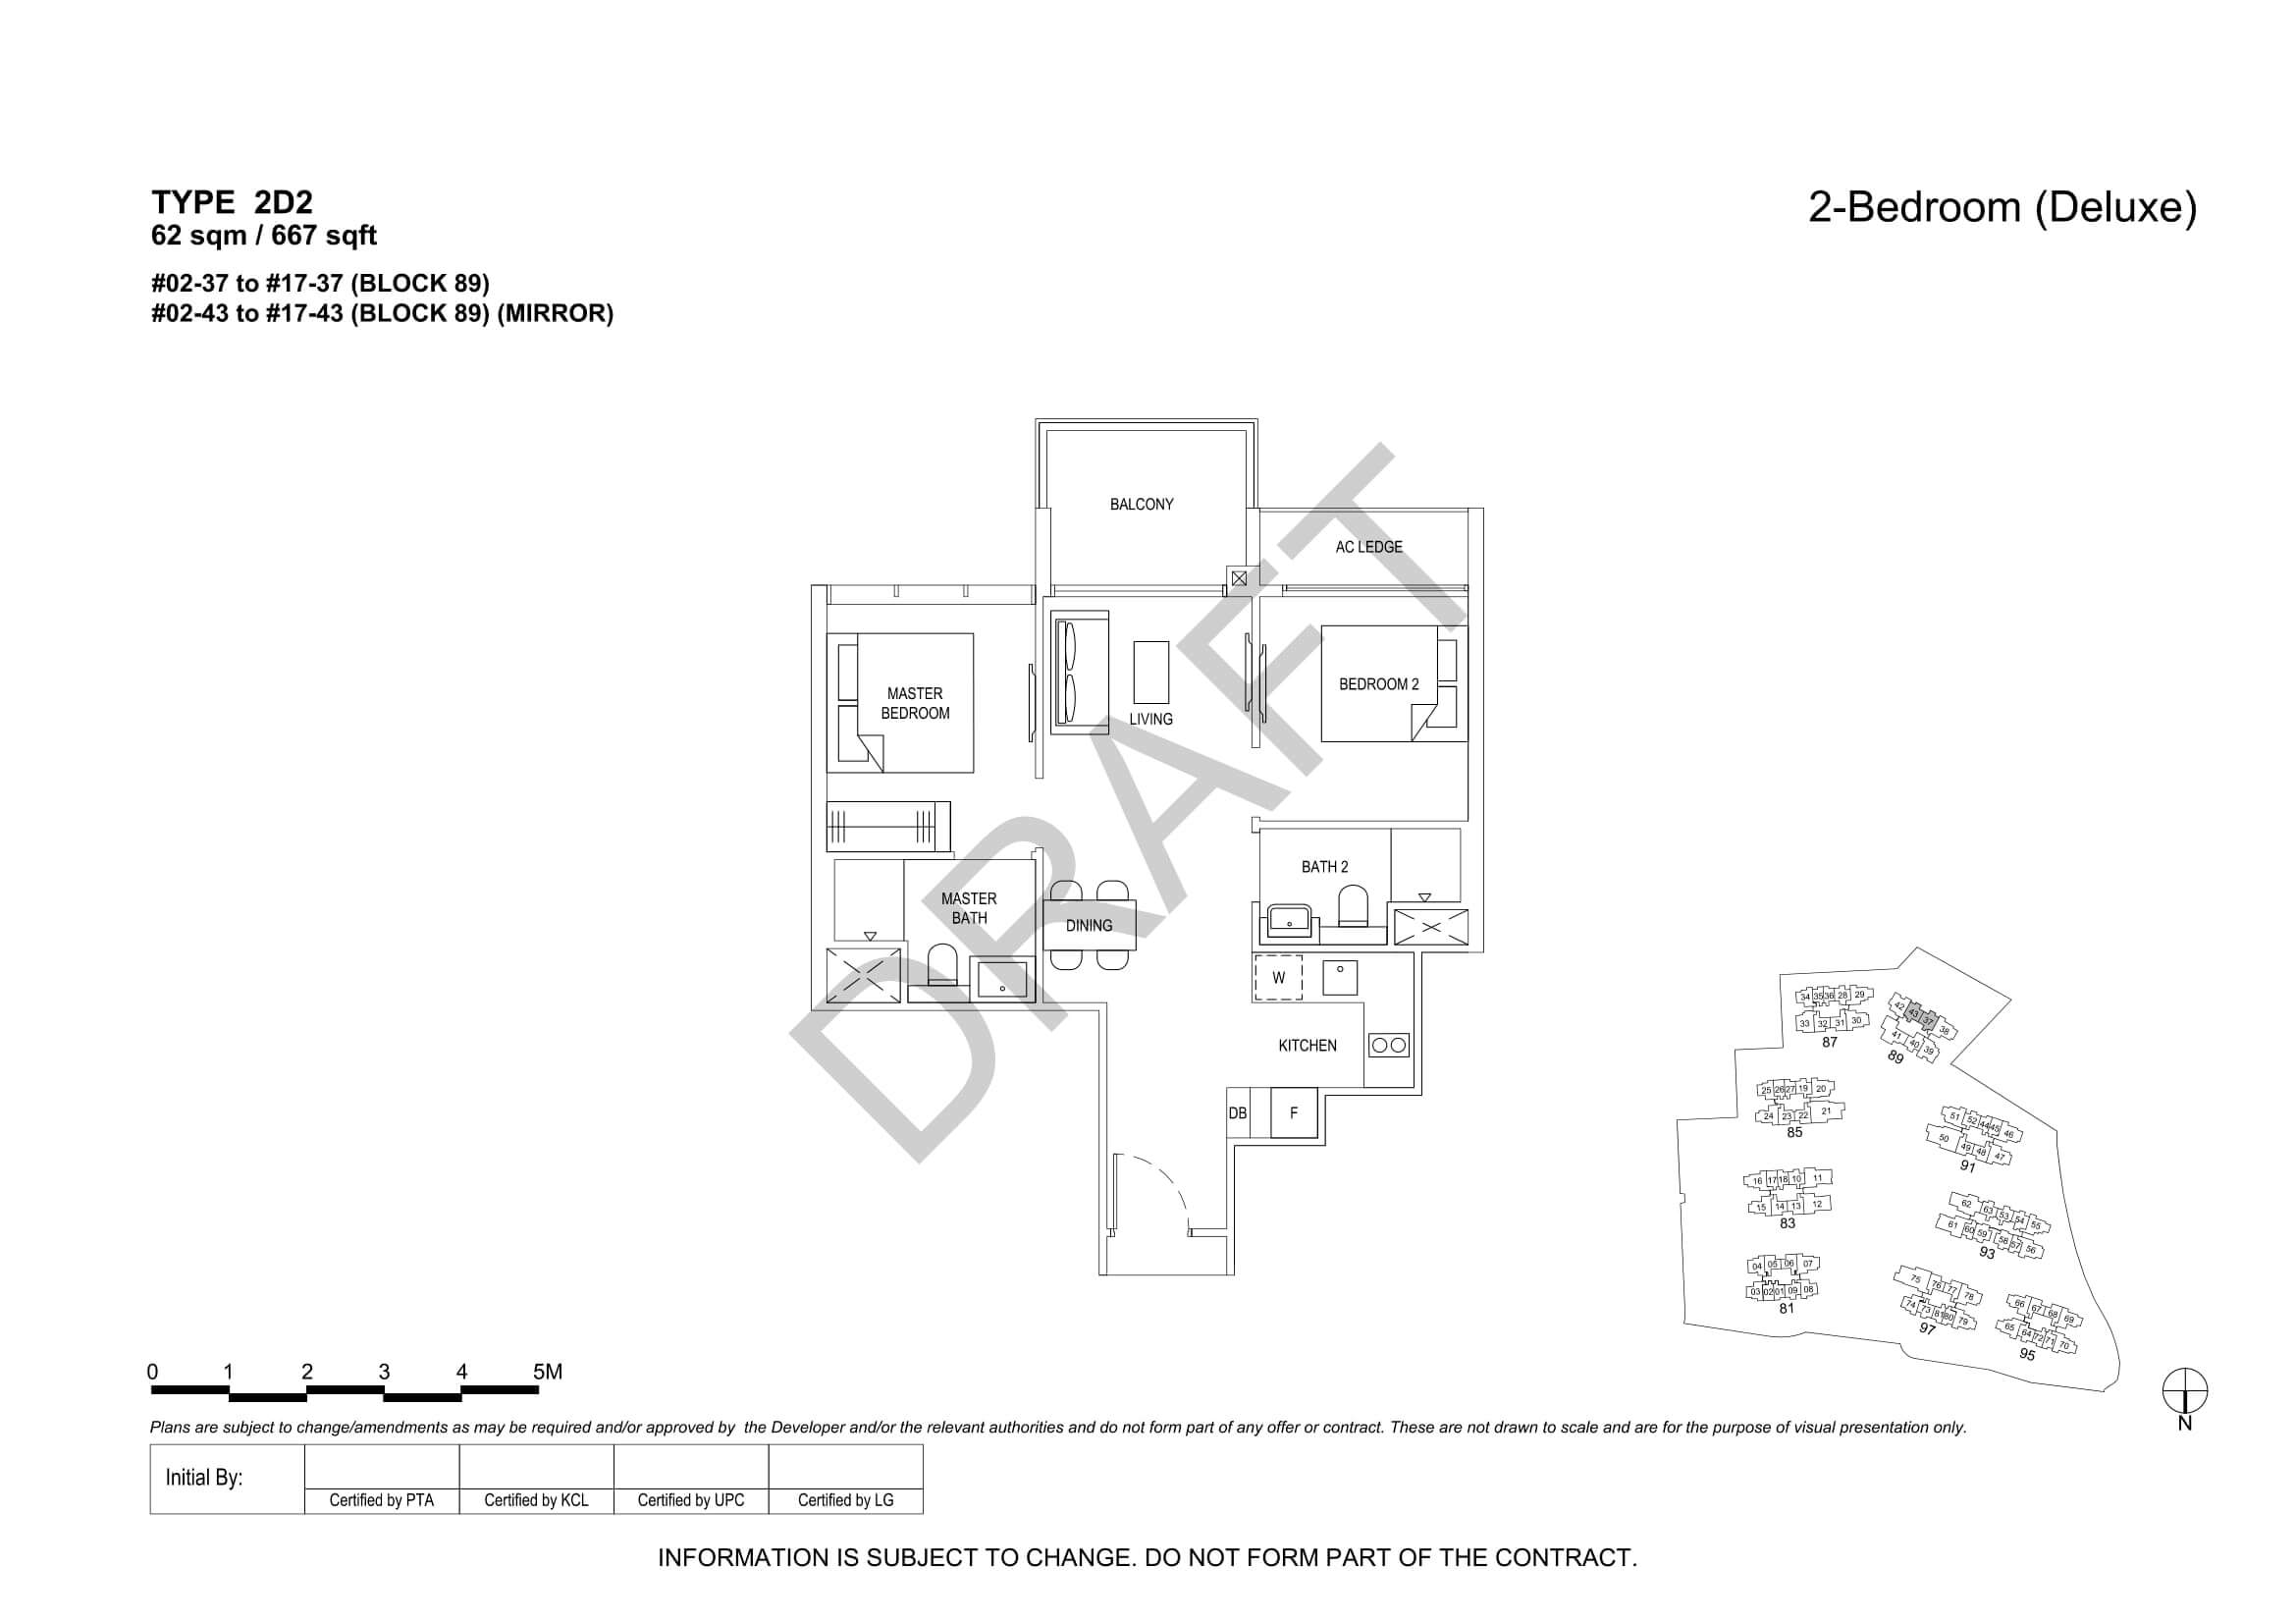 The Florence Residences Floor Plan 2-Bedroom Type 2D2